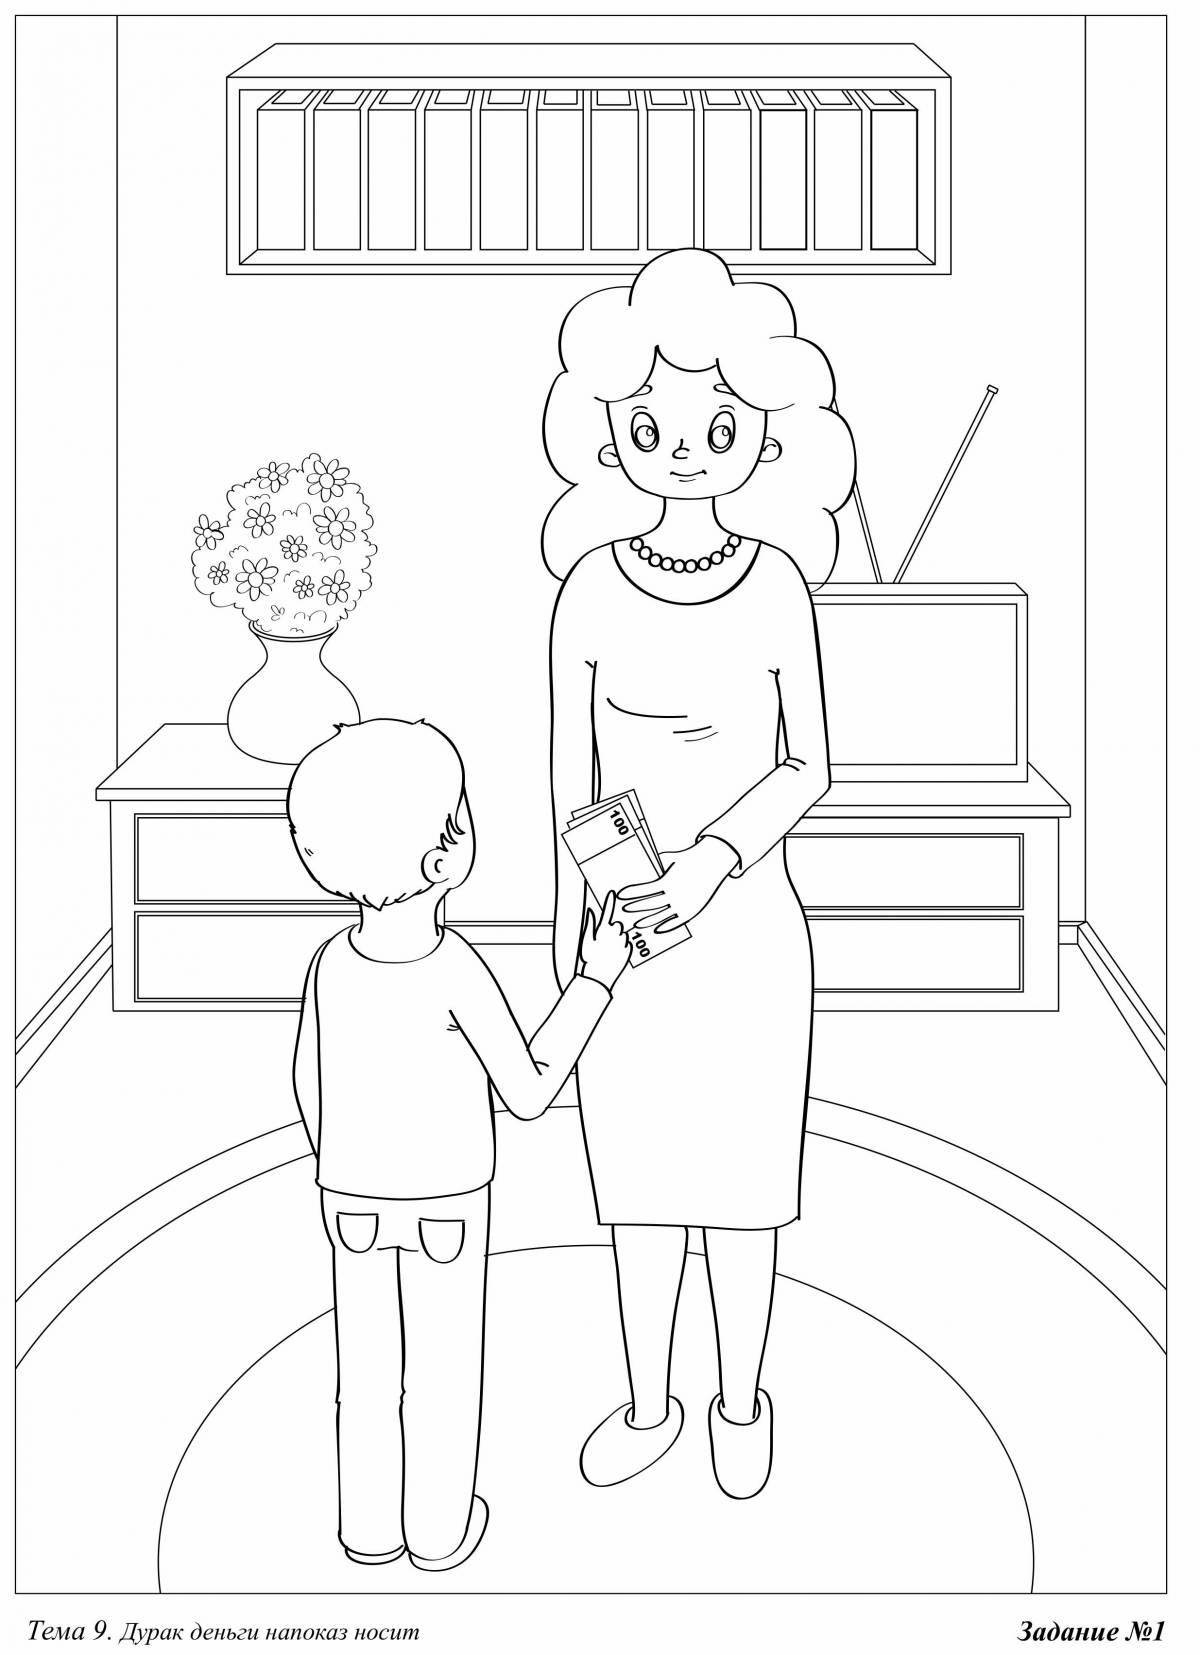 Primary school creative financial literacy coloring page